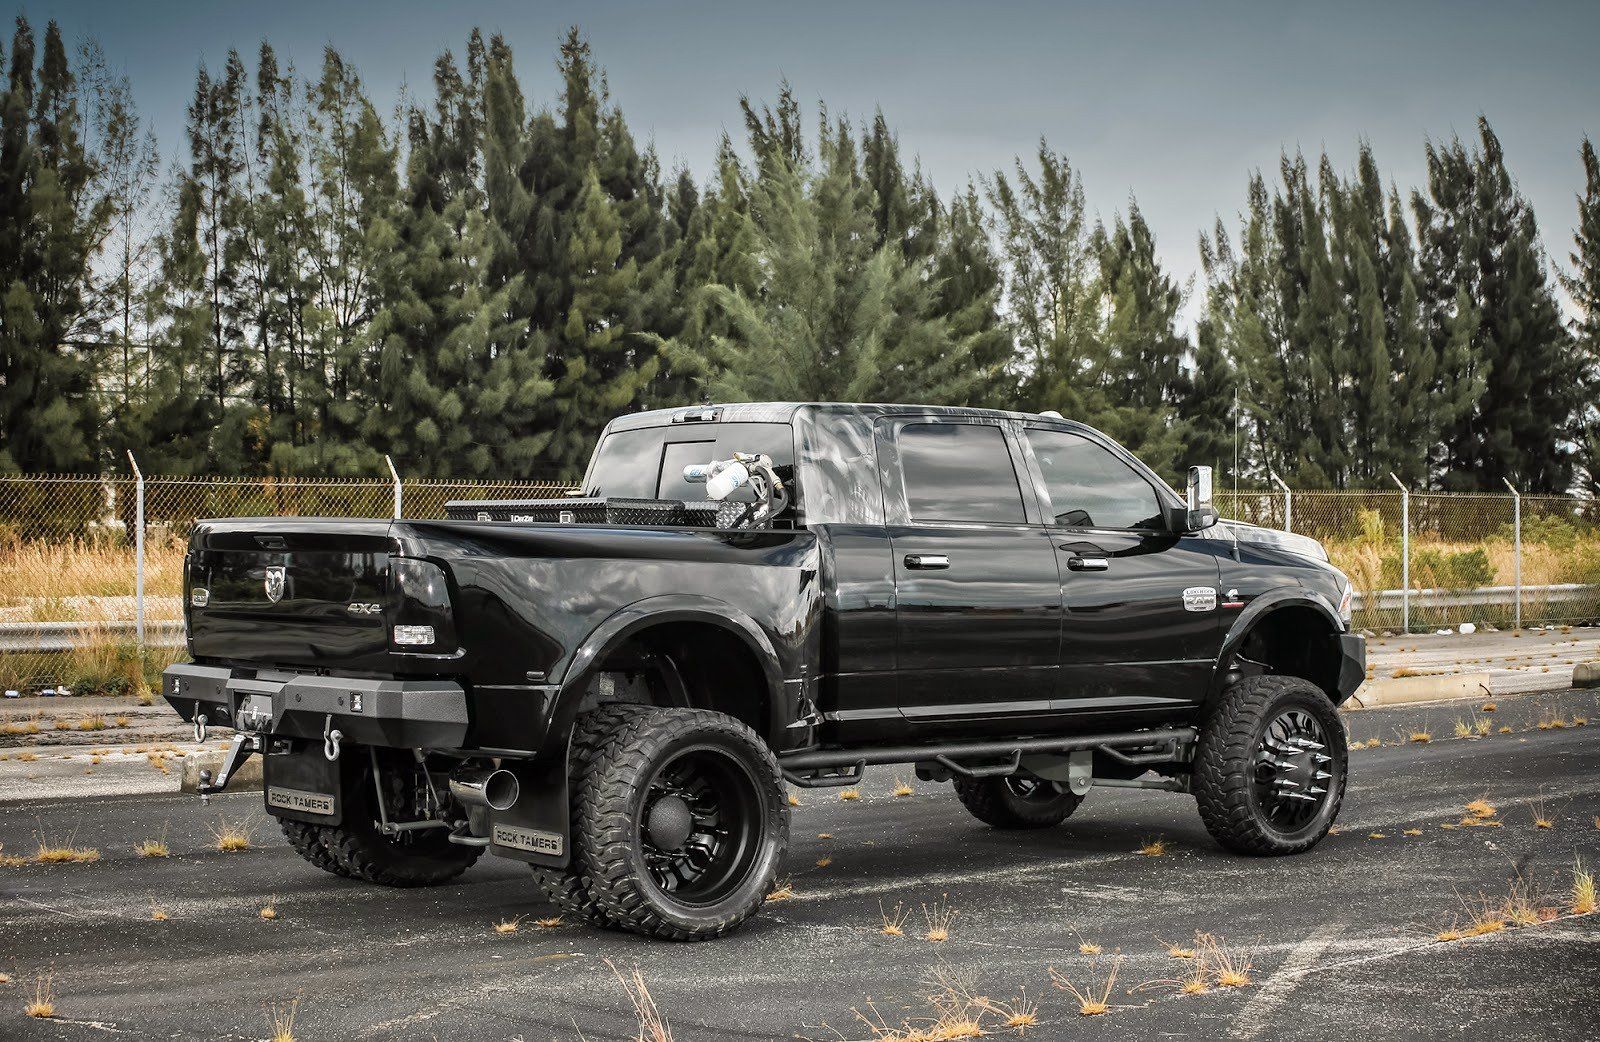 ford, F Super, Duty, Truck, Pickup, Cars, Black, Tuning Wallpaper HD / Desktop and Mobile Background